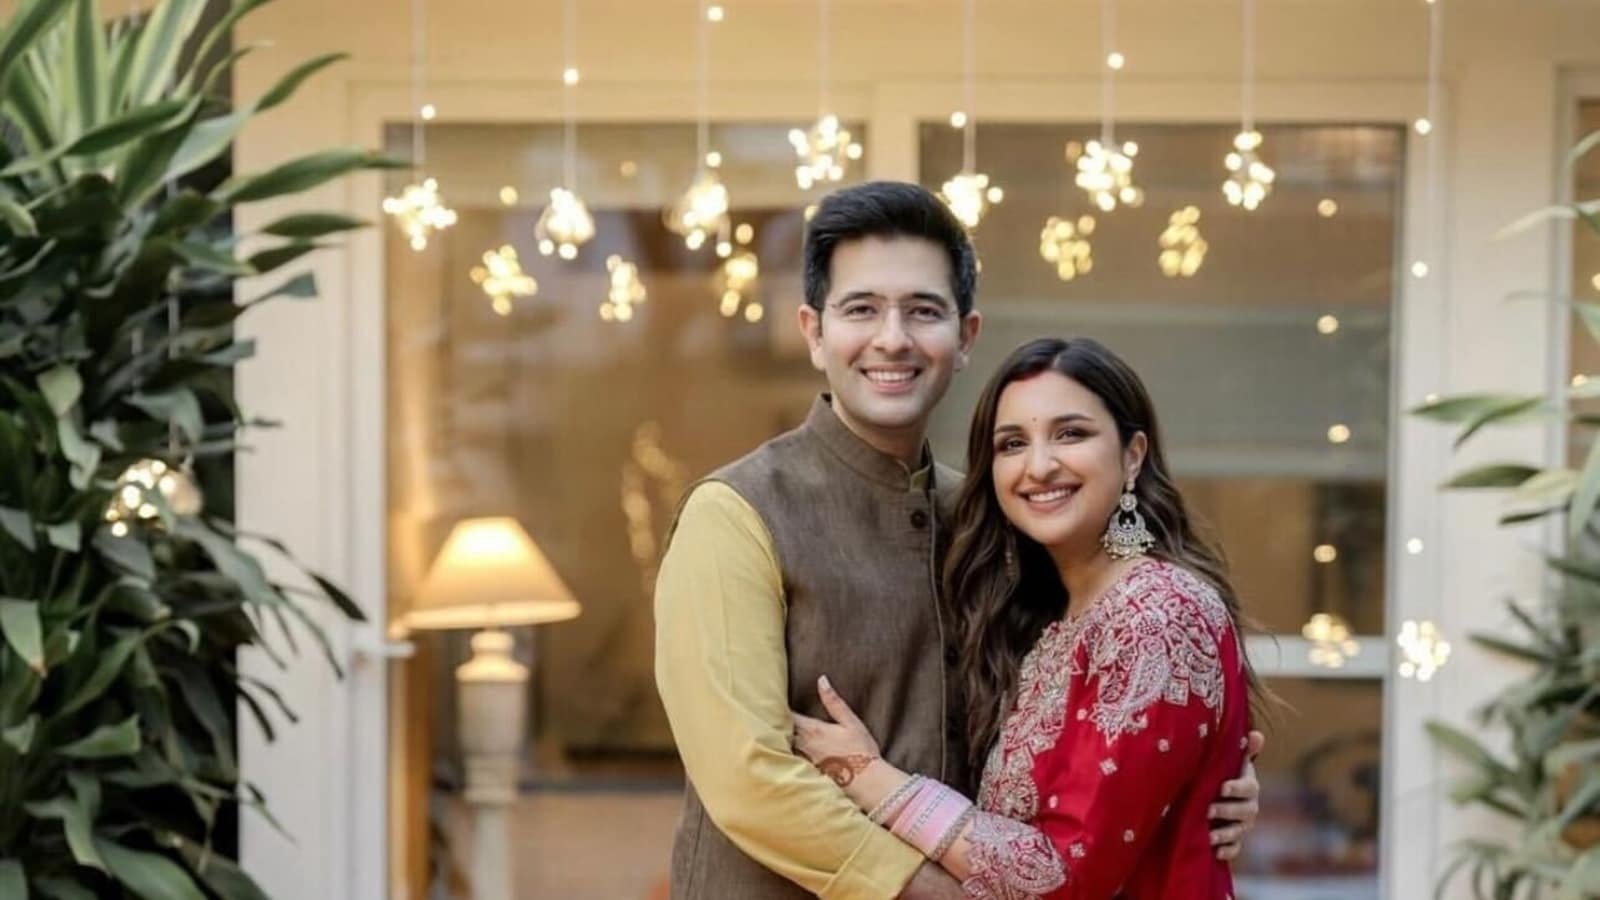 Raghav Chadha is recovering nicely after his eye surgery, and Parineeti Chopra is by his side in London.